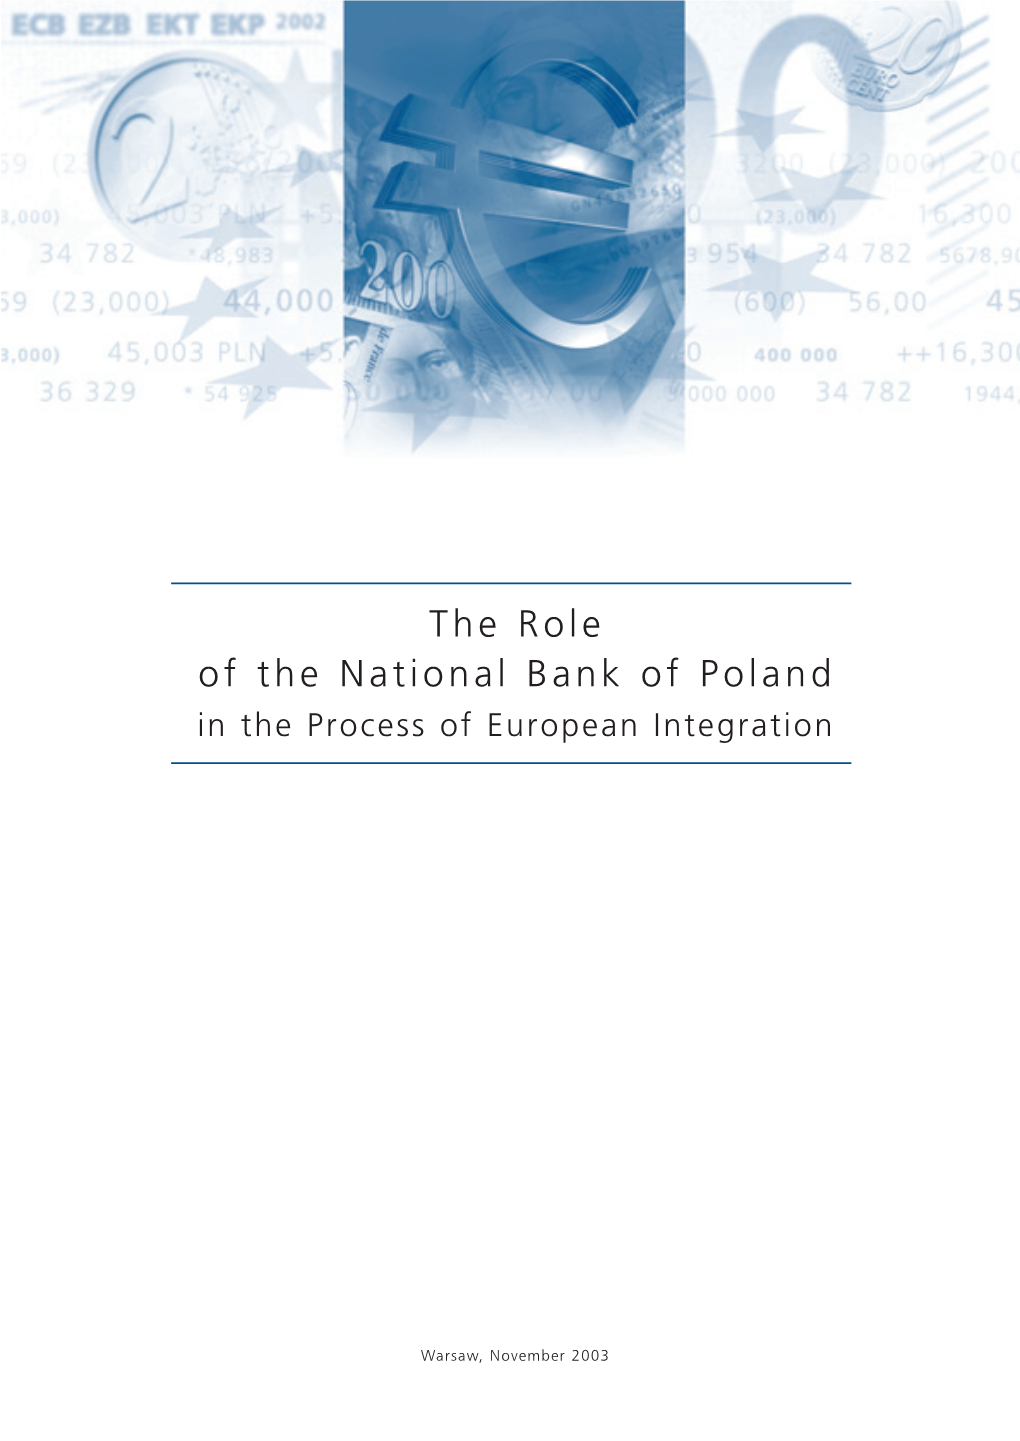 The Role of the National Bank of Poland in the Process of European Integration